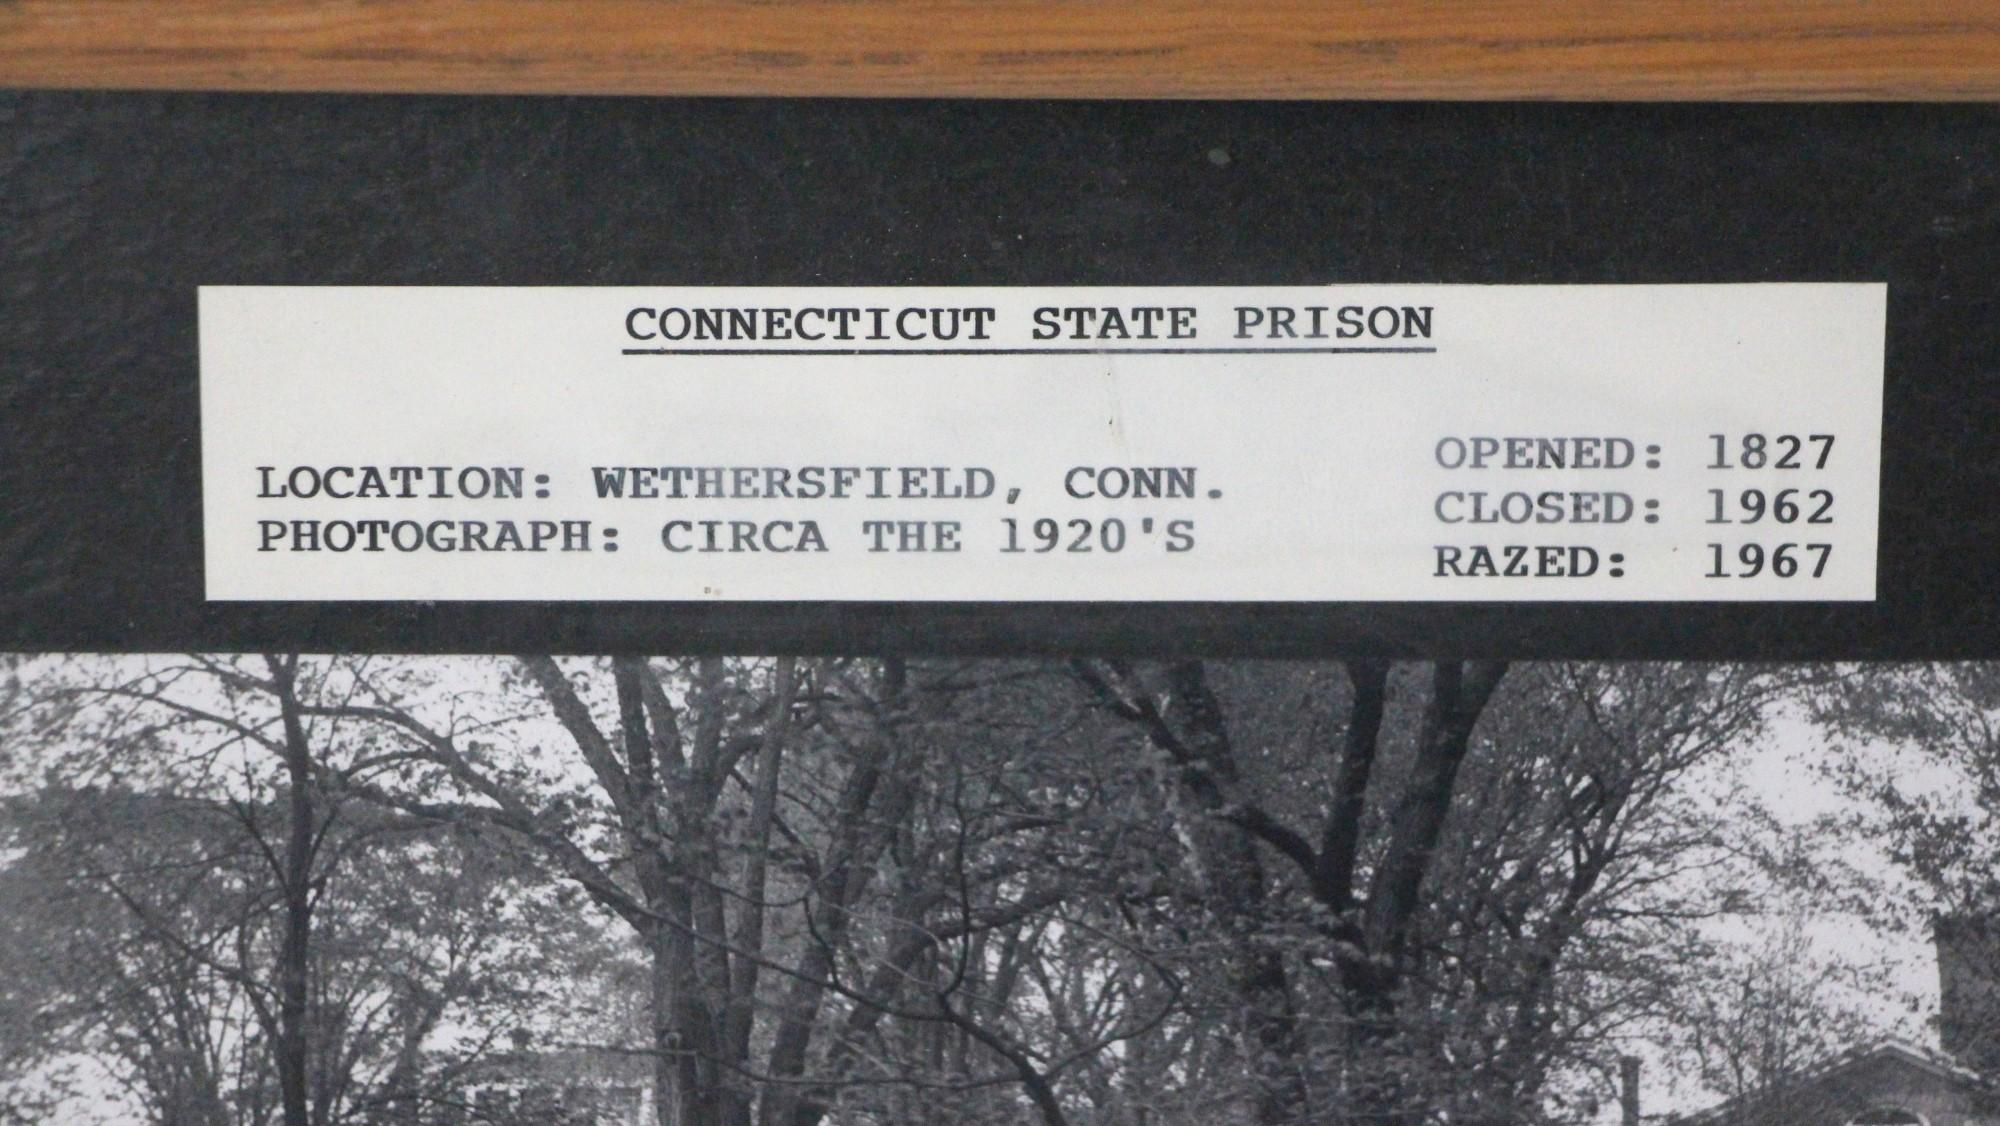 Circa 1920s. framed antique picture taken of the Connecticut State Prison. The Prison was opened in 1827 and was closed 1962. It also shows the 